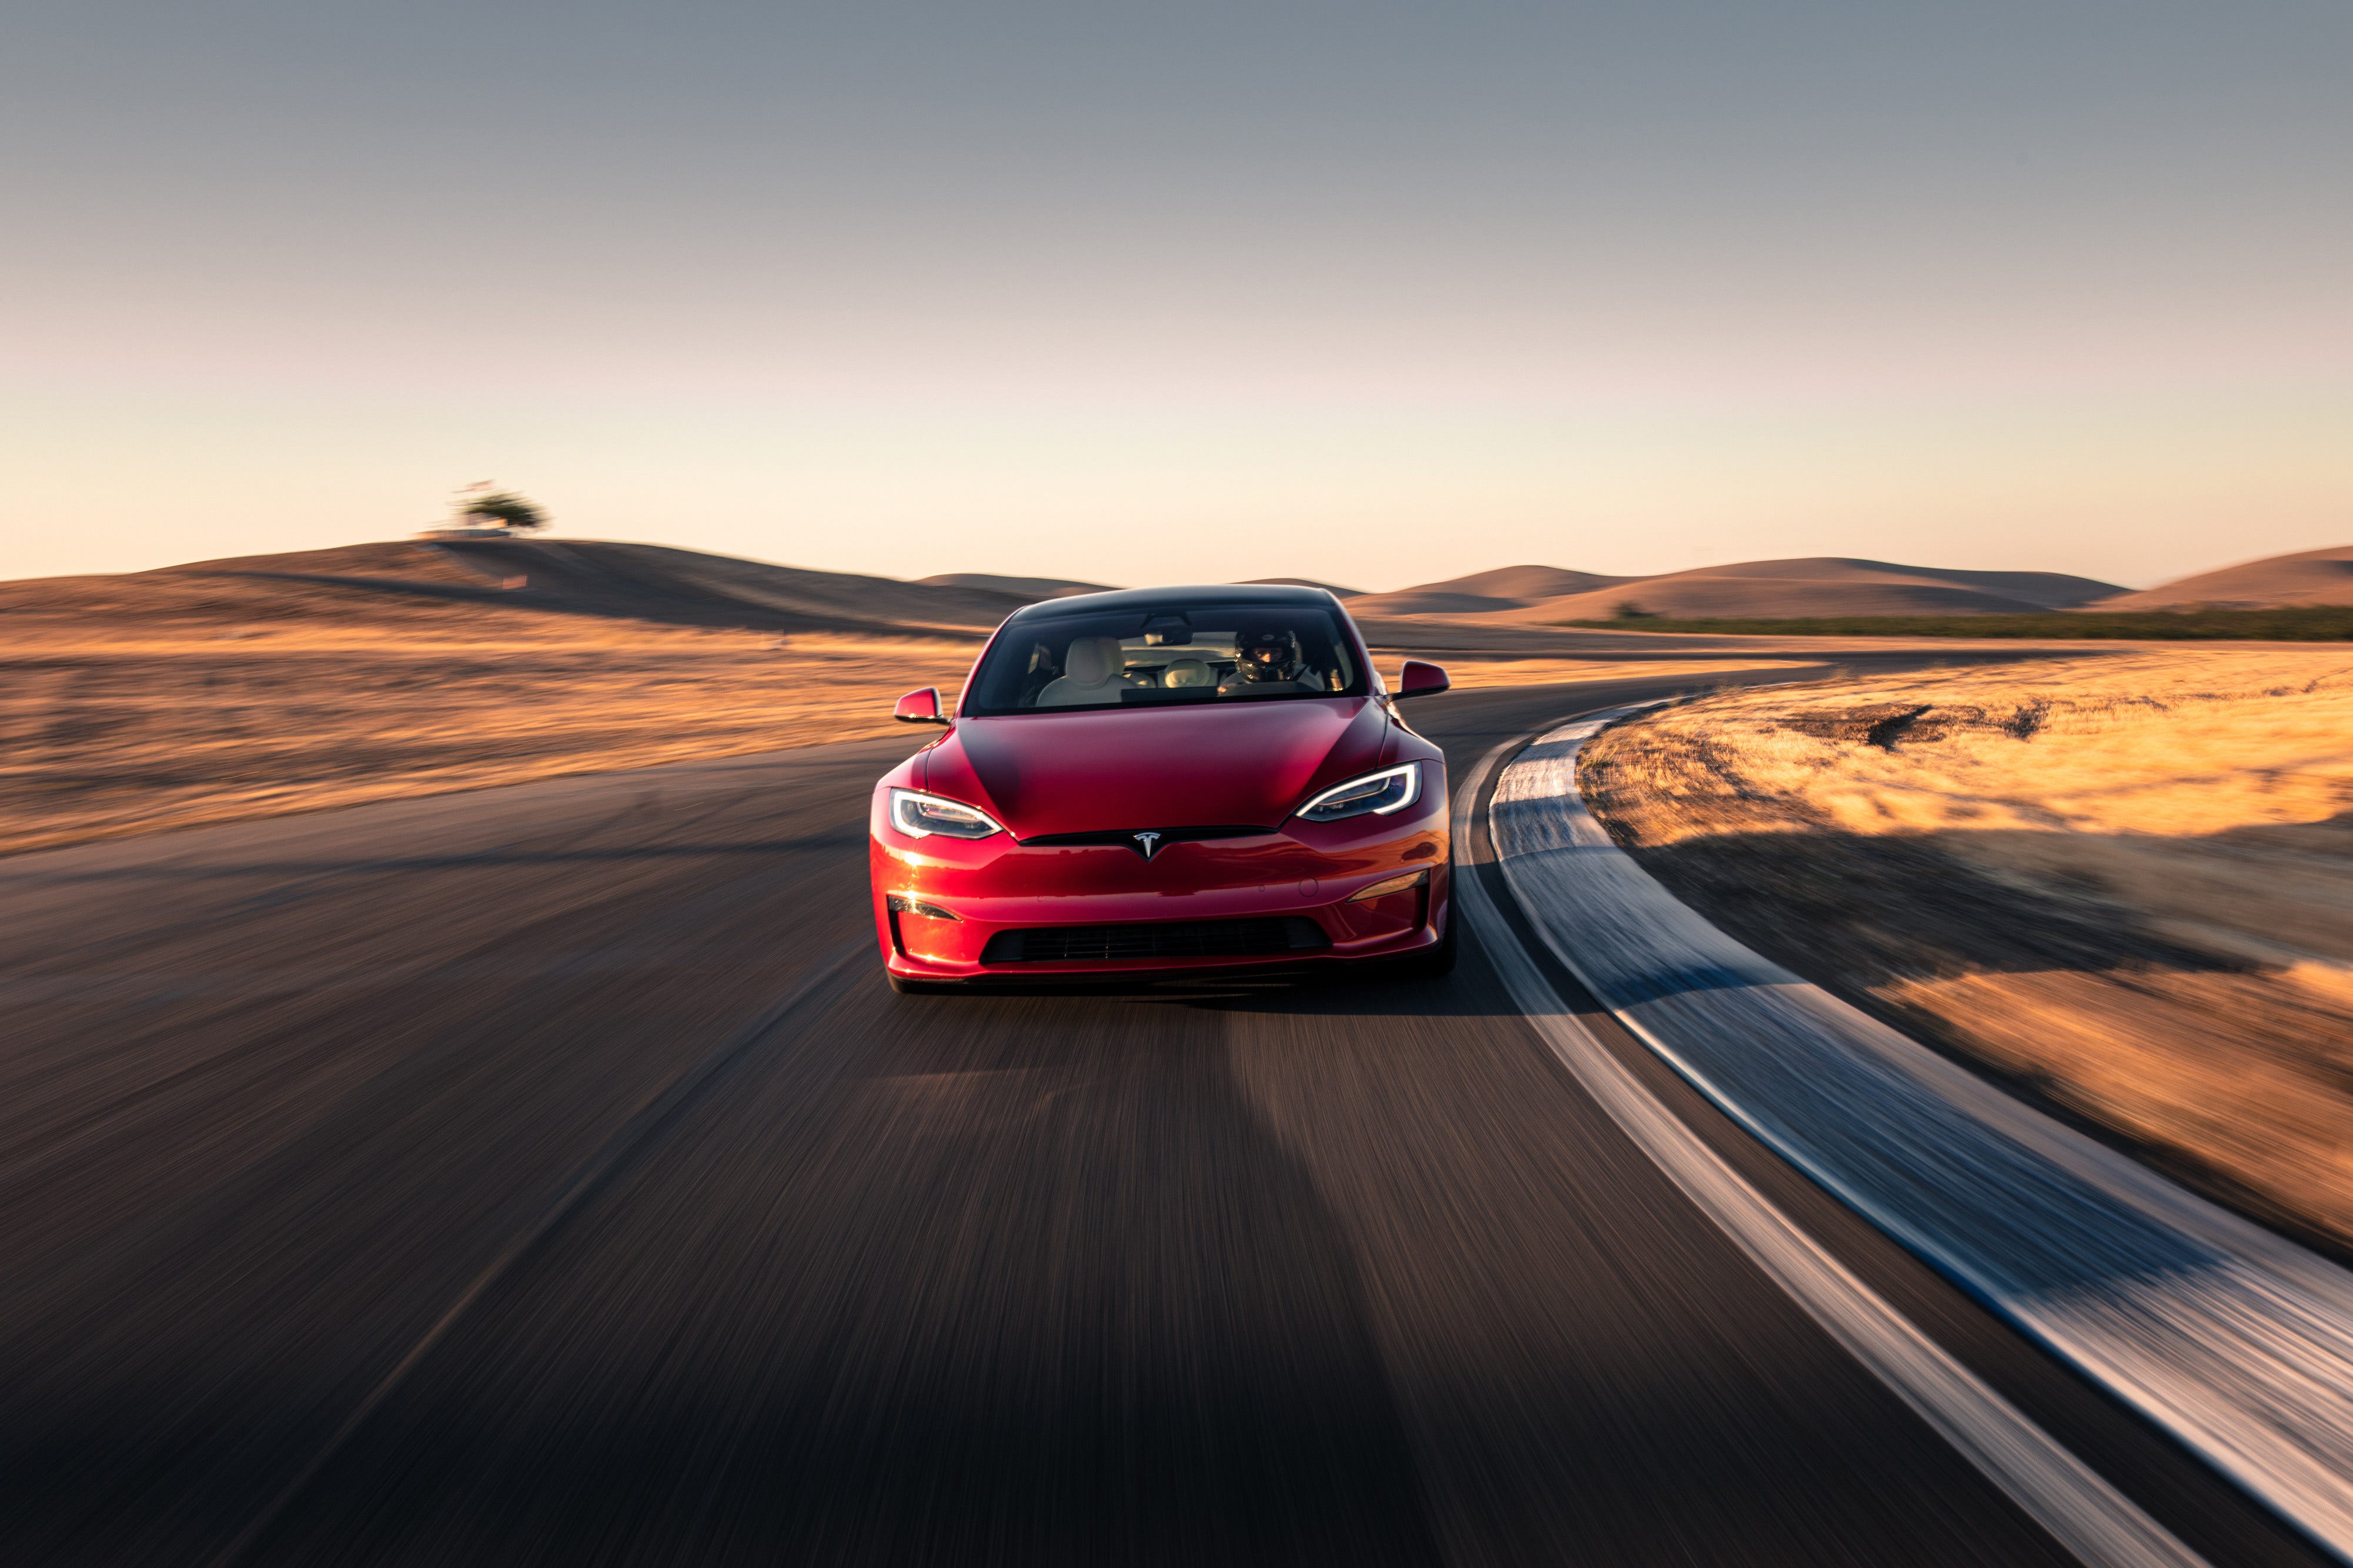 Tesla Q4 Deliveries Beat Consensus By A Mile, Pushing Annual Sales To Nearly 1M